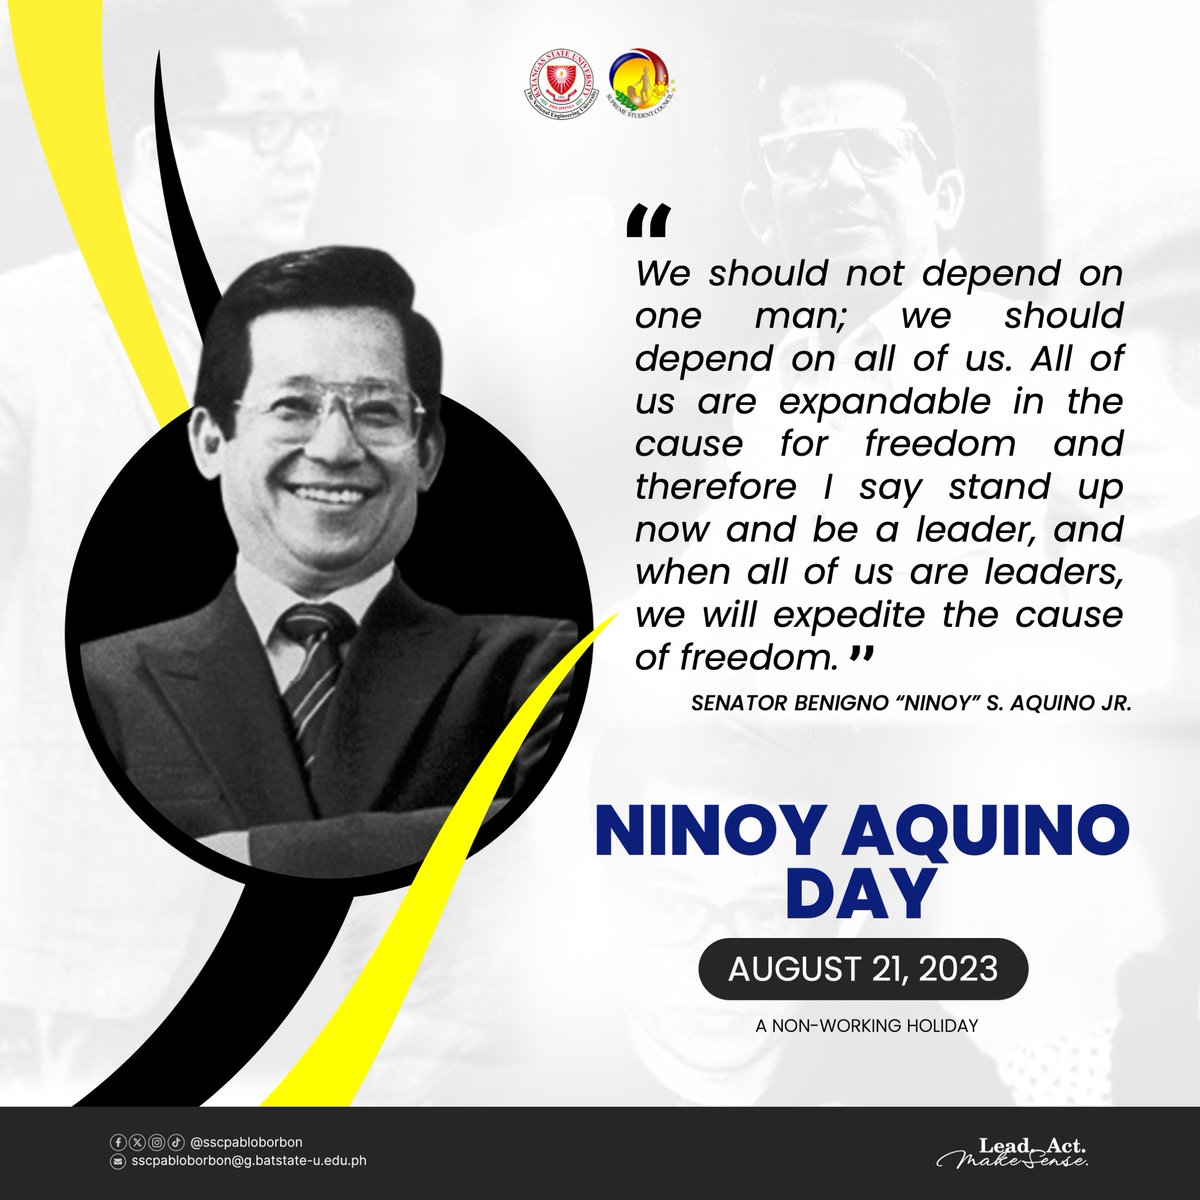 A Stride for Independence!

Today, we pay respect to Benigno 'Ninoy' Simeon Aquino Jr. for his tireless advocacy for democracy and freedom. 

#NinoyAquinoDay
#LeadActMakeSense
#ZitoRedSpartans